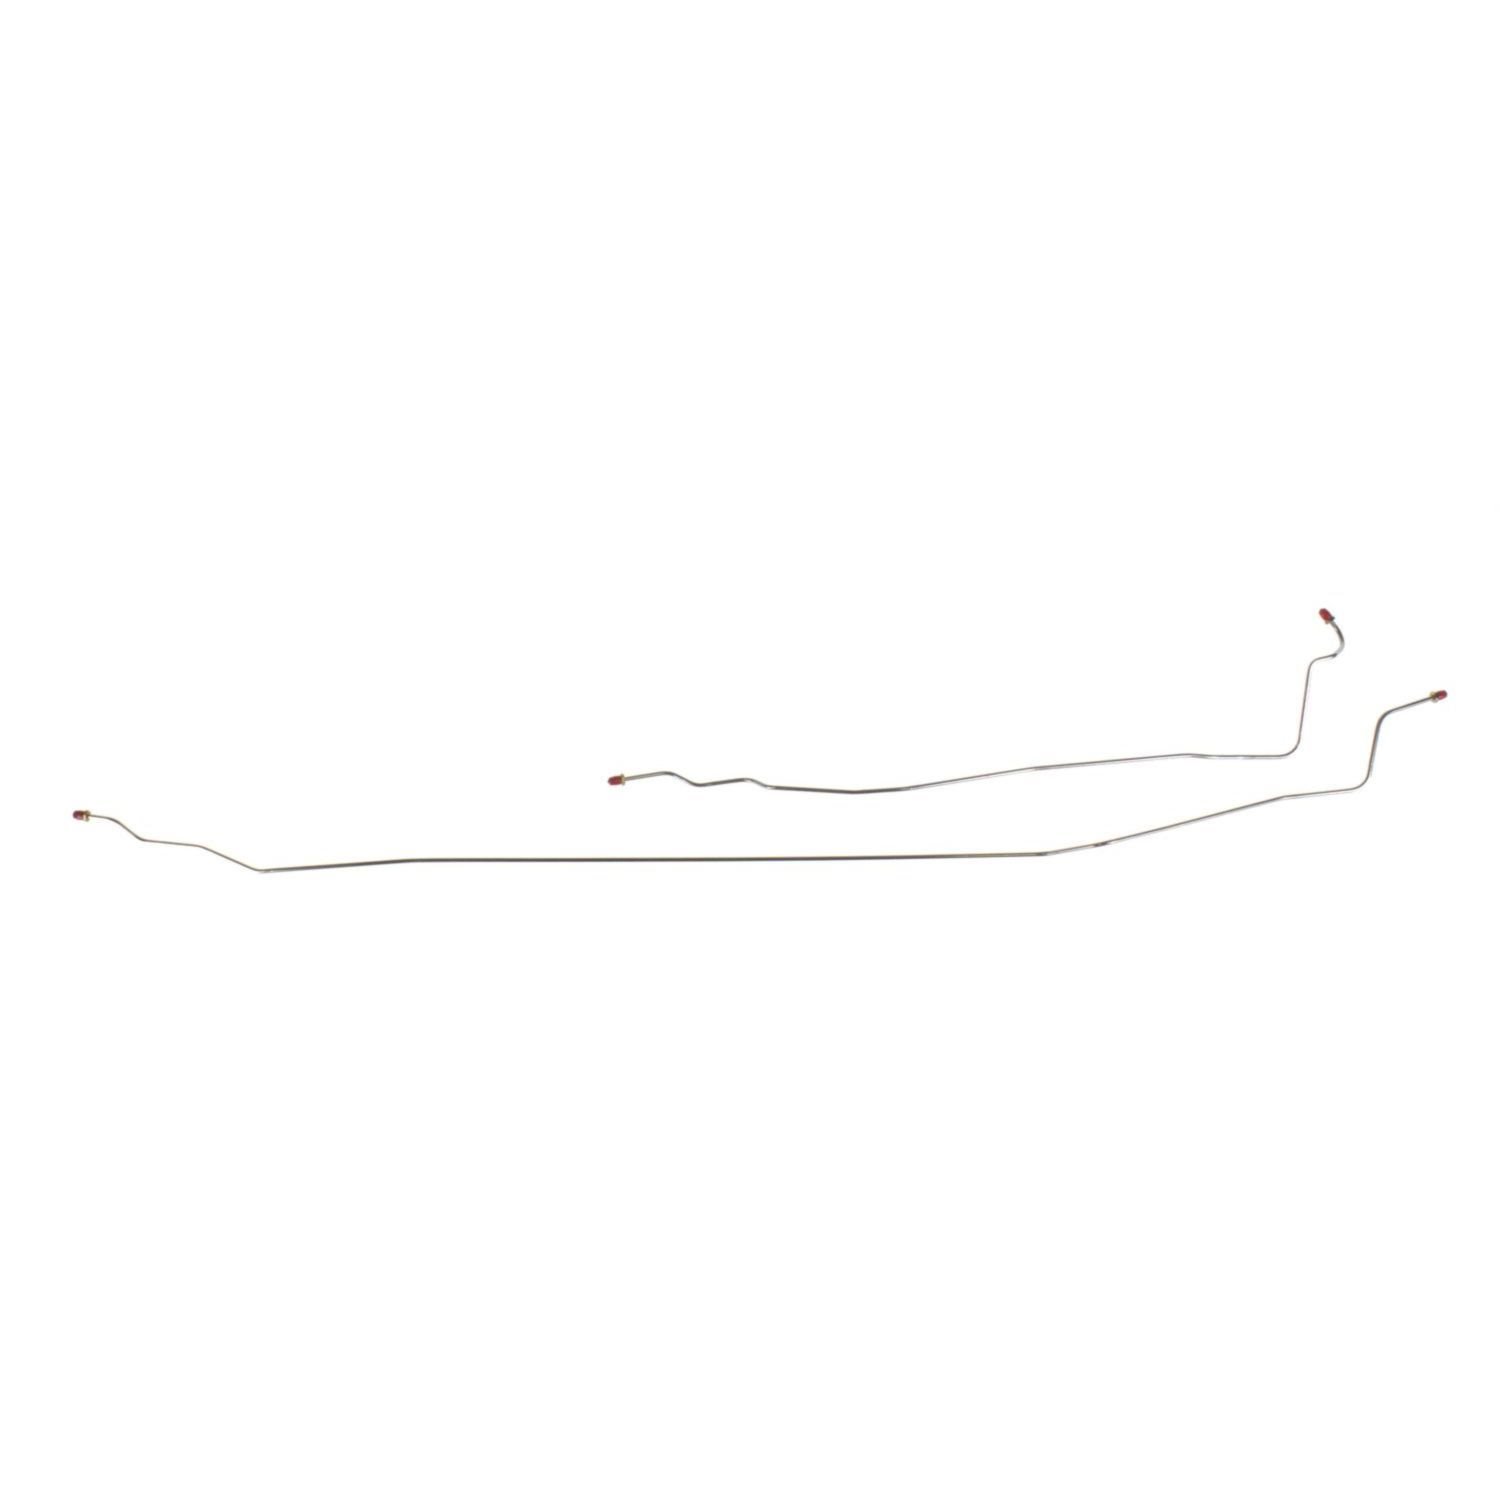 89 4WD Long Bed Front To Rear Brake Line 2pcs SS